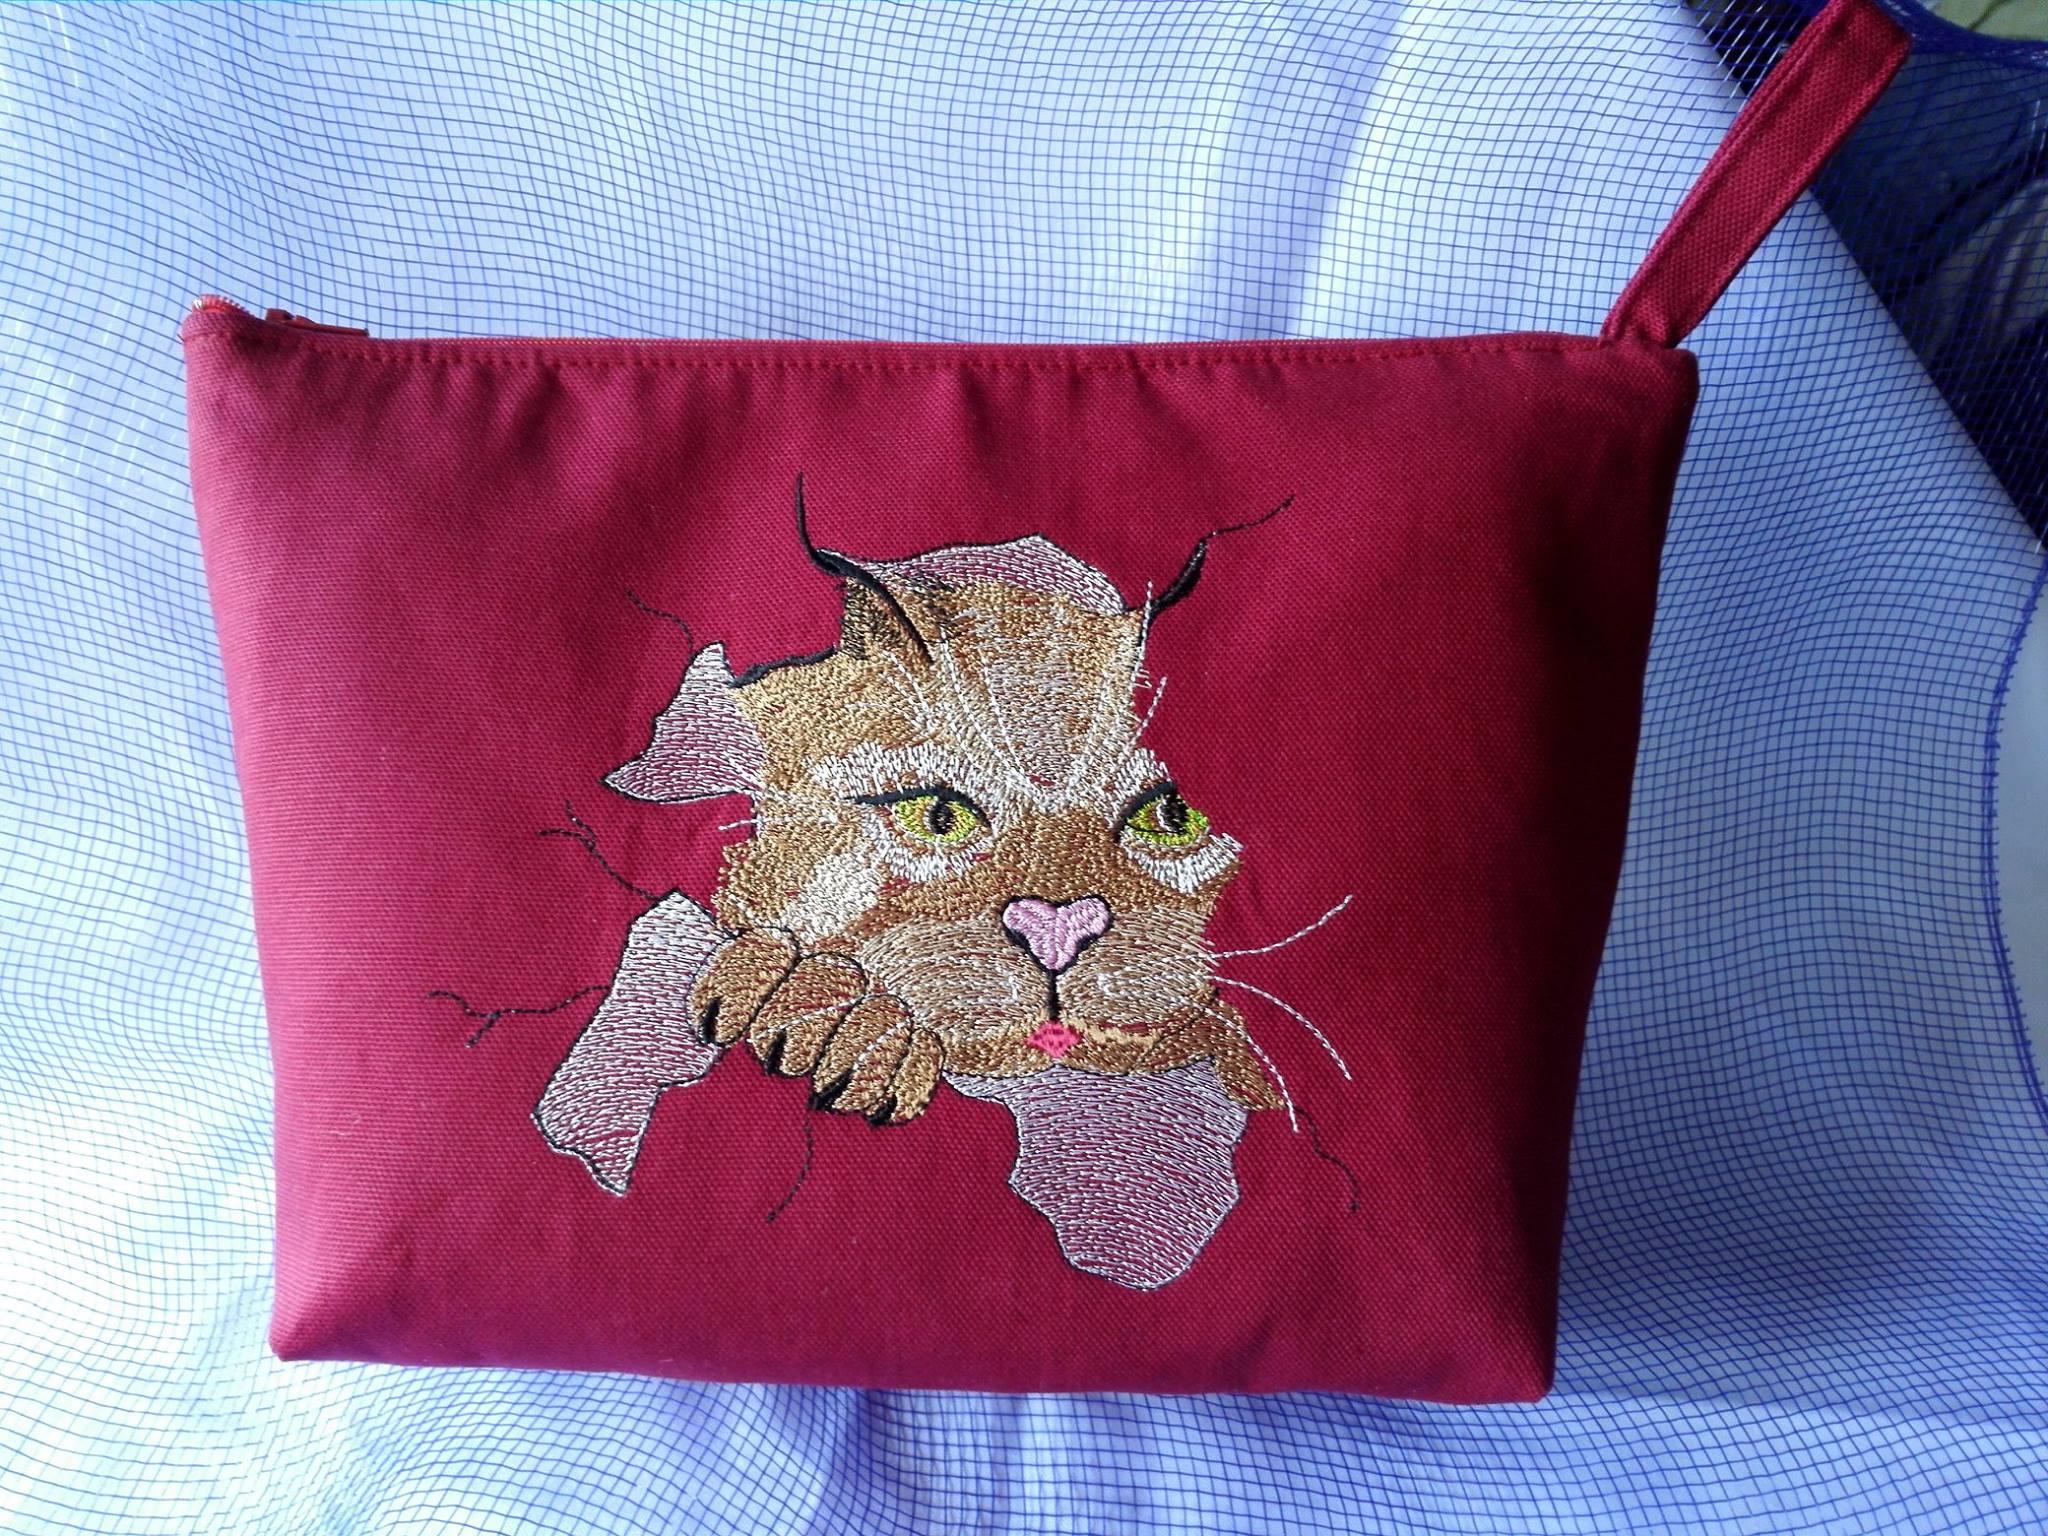 Small bag with angry cat free embroidery